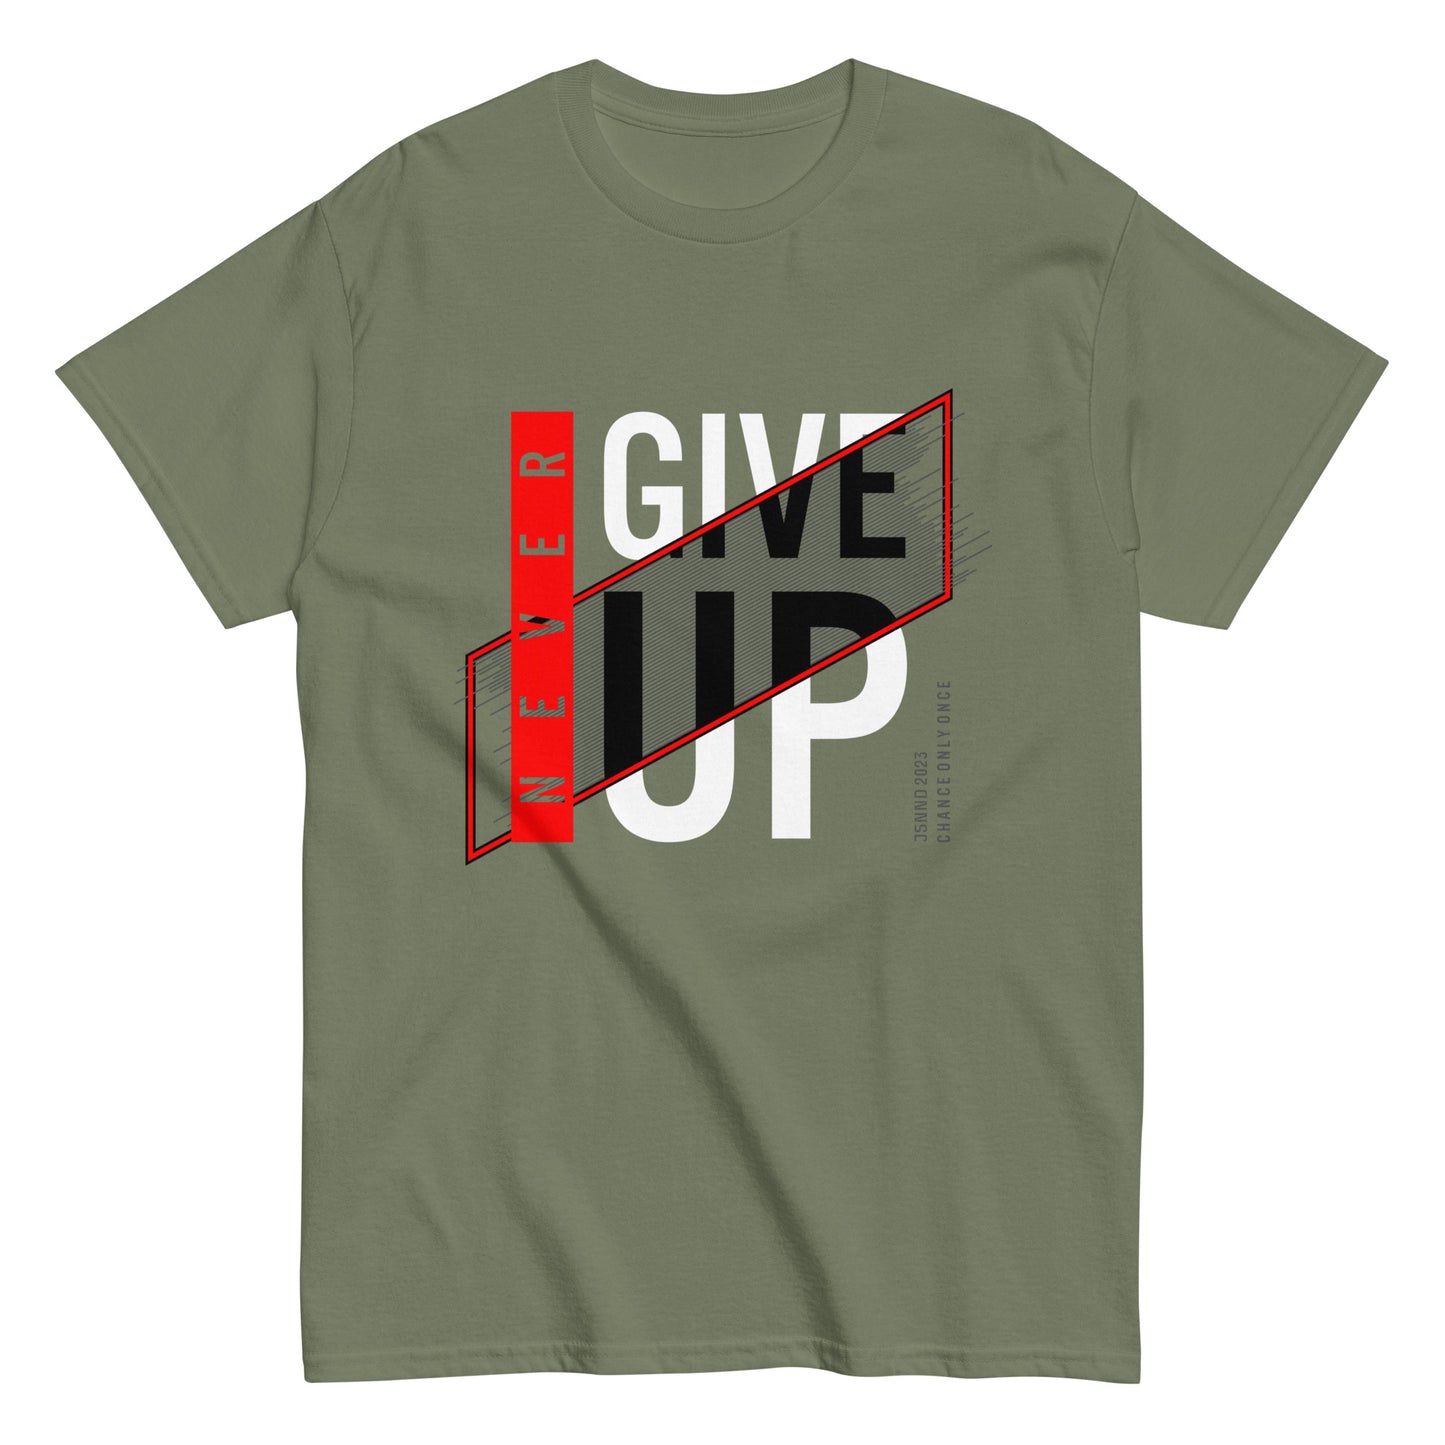 Never give up classic tee